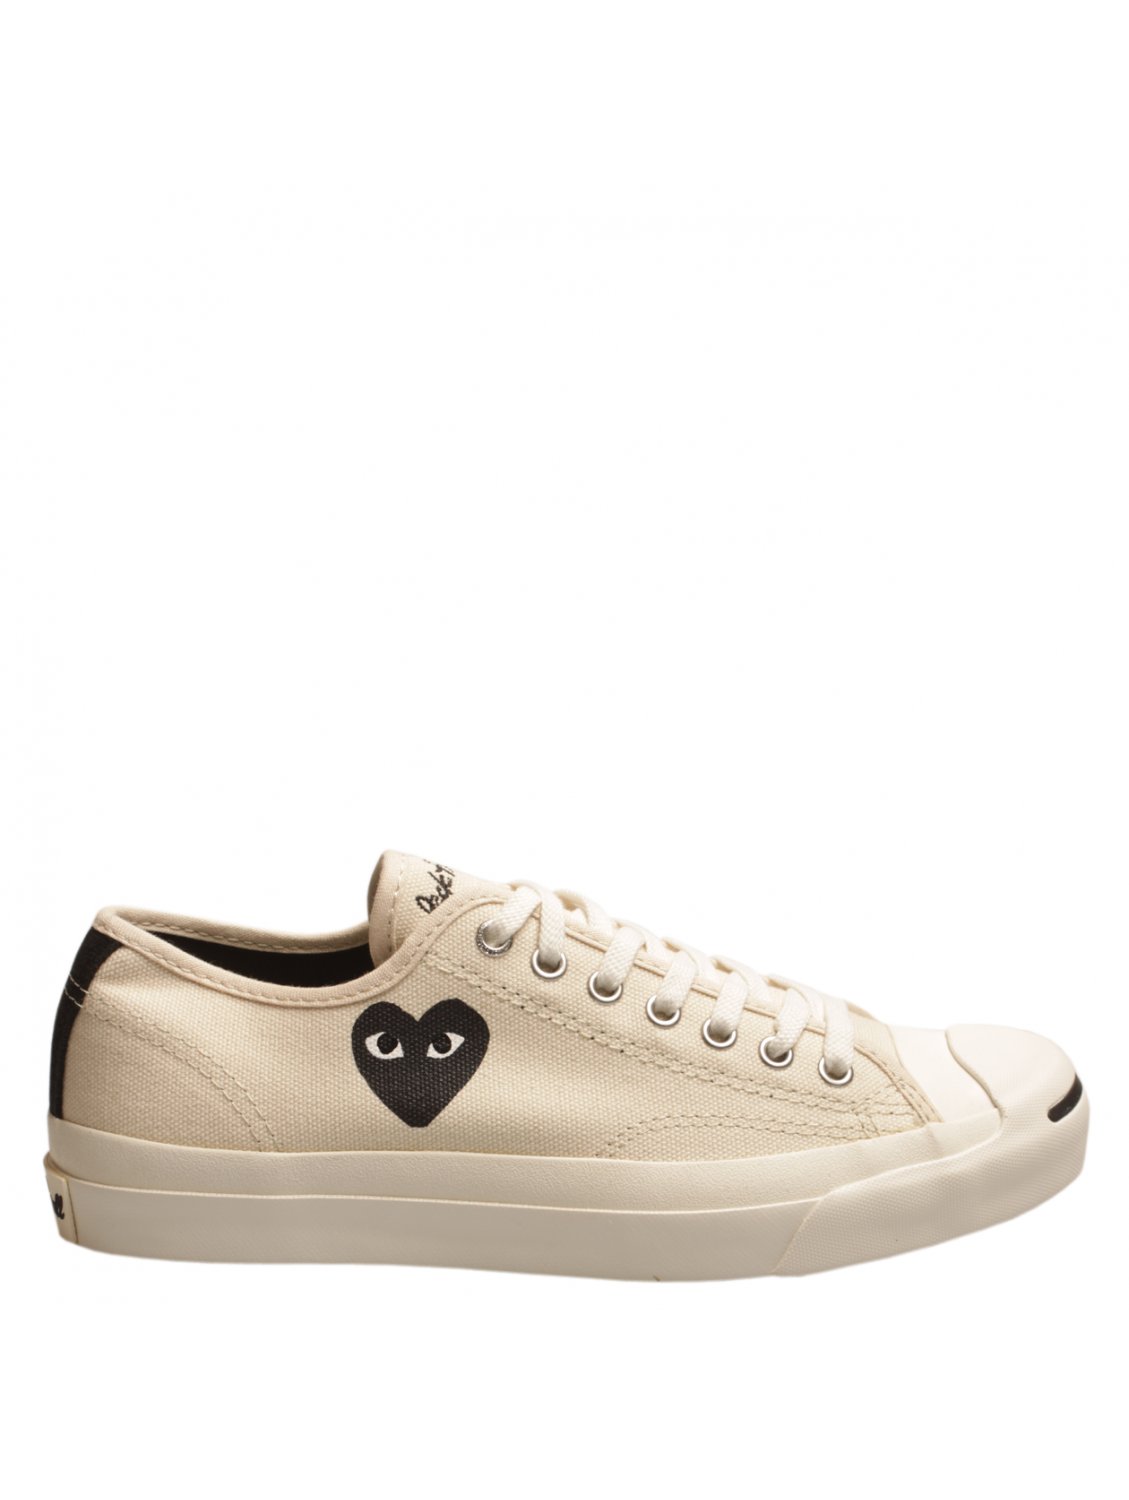 Comme des garçons Mens Play Jack Purcell Converse Cream with Black ...